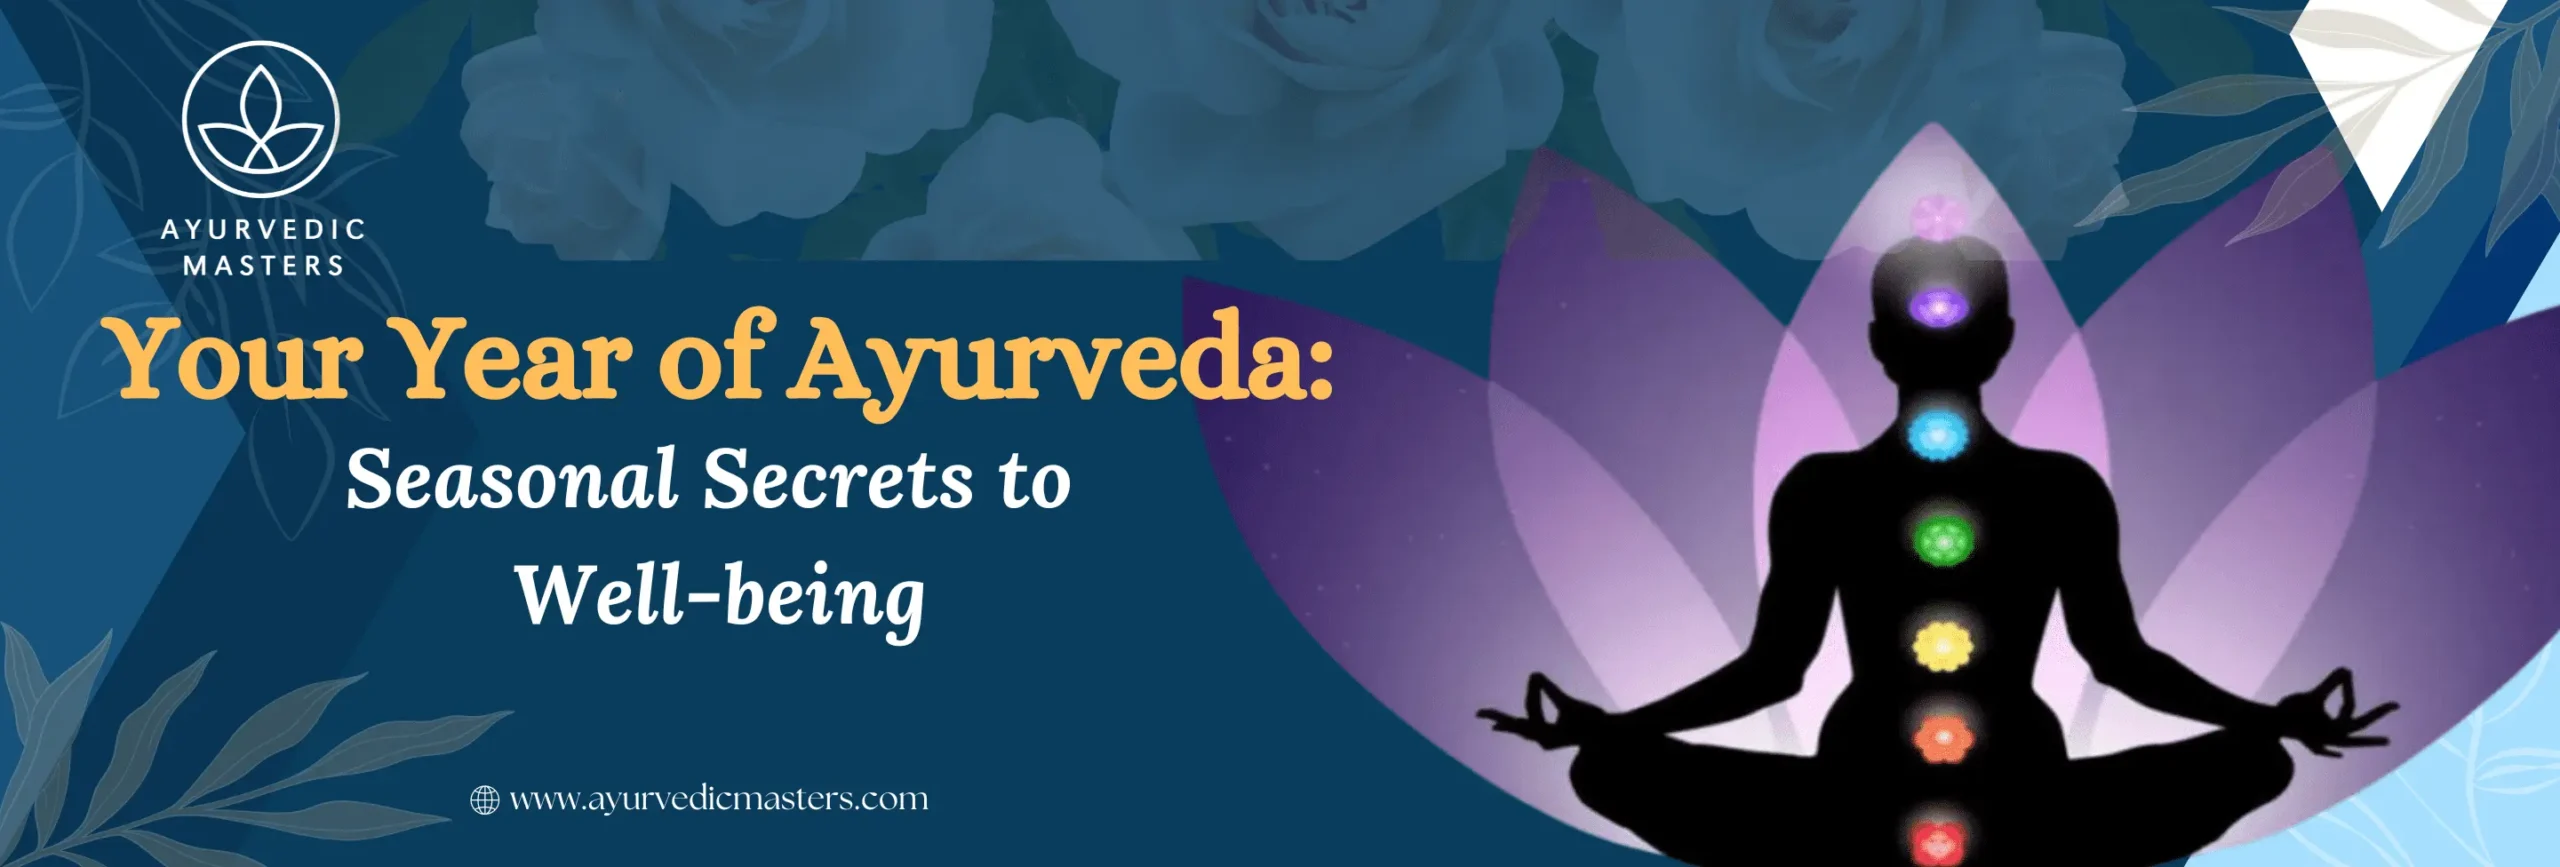 Your Year of Ayurveda